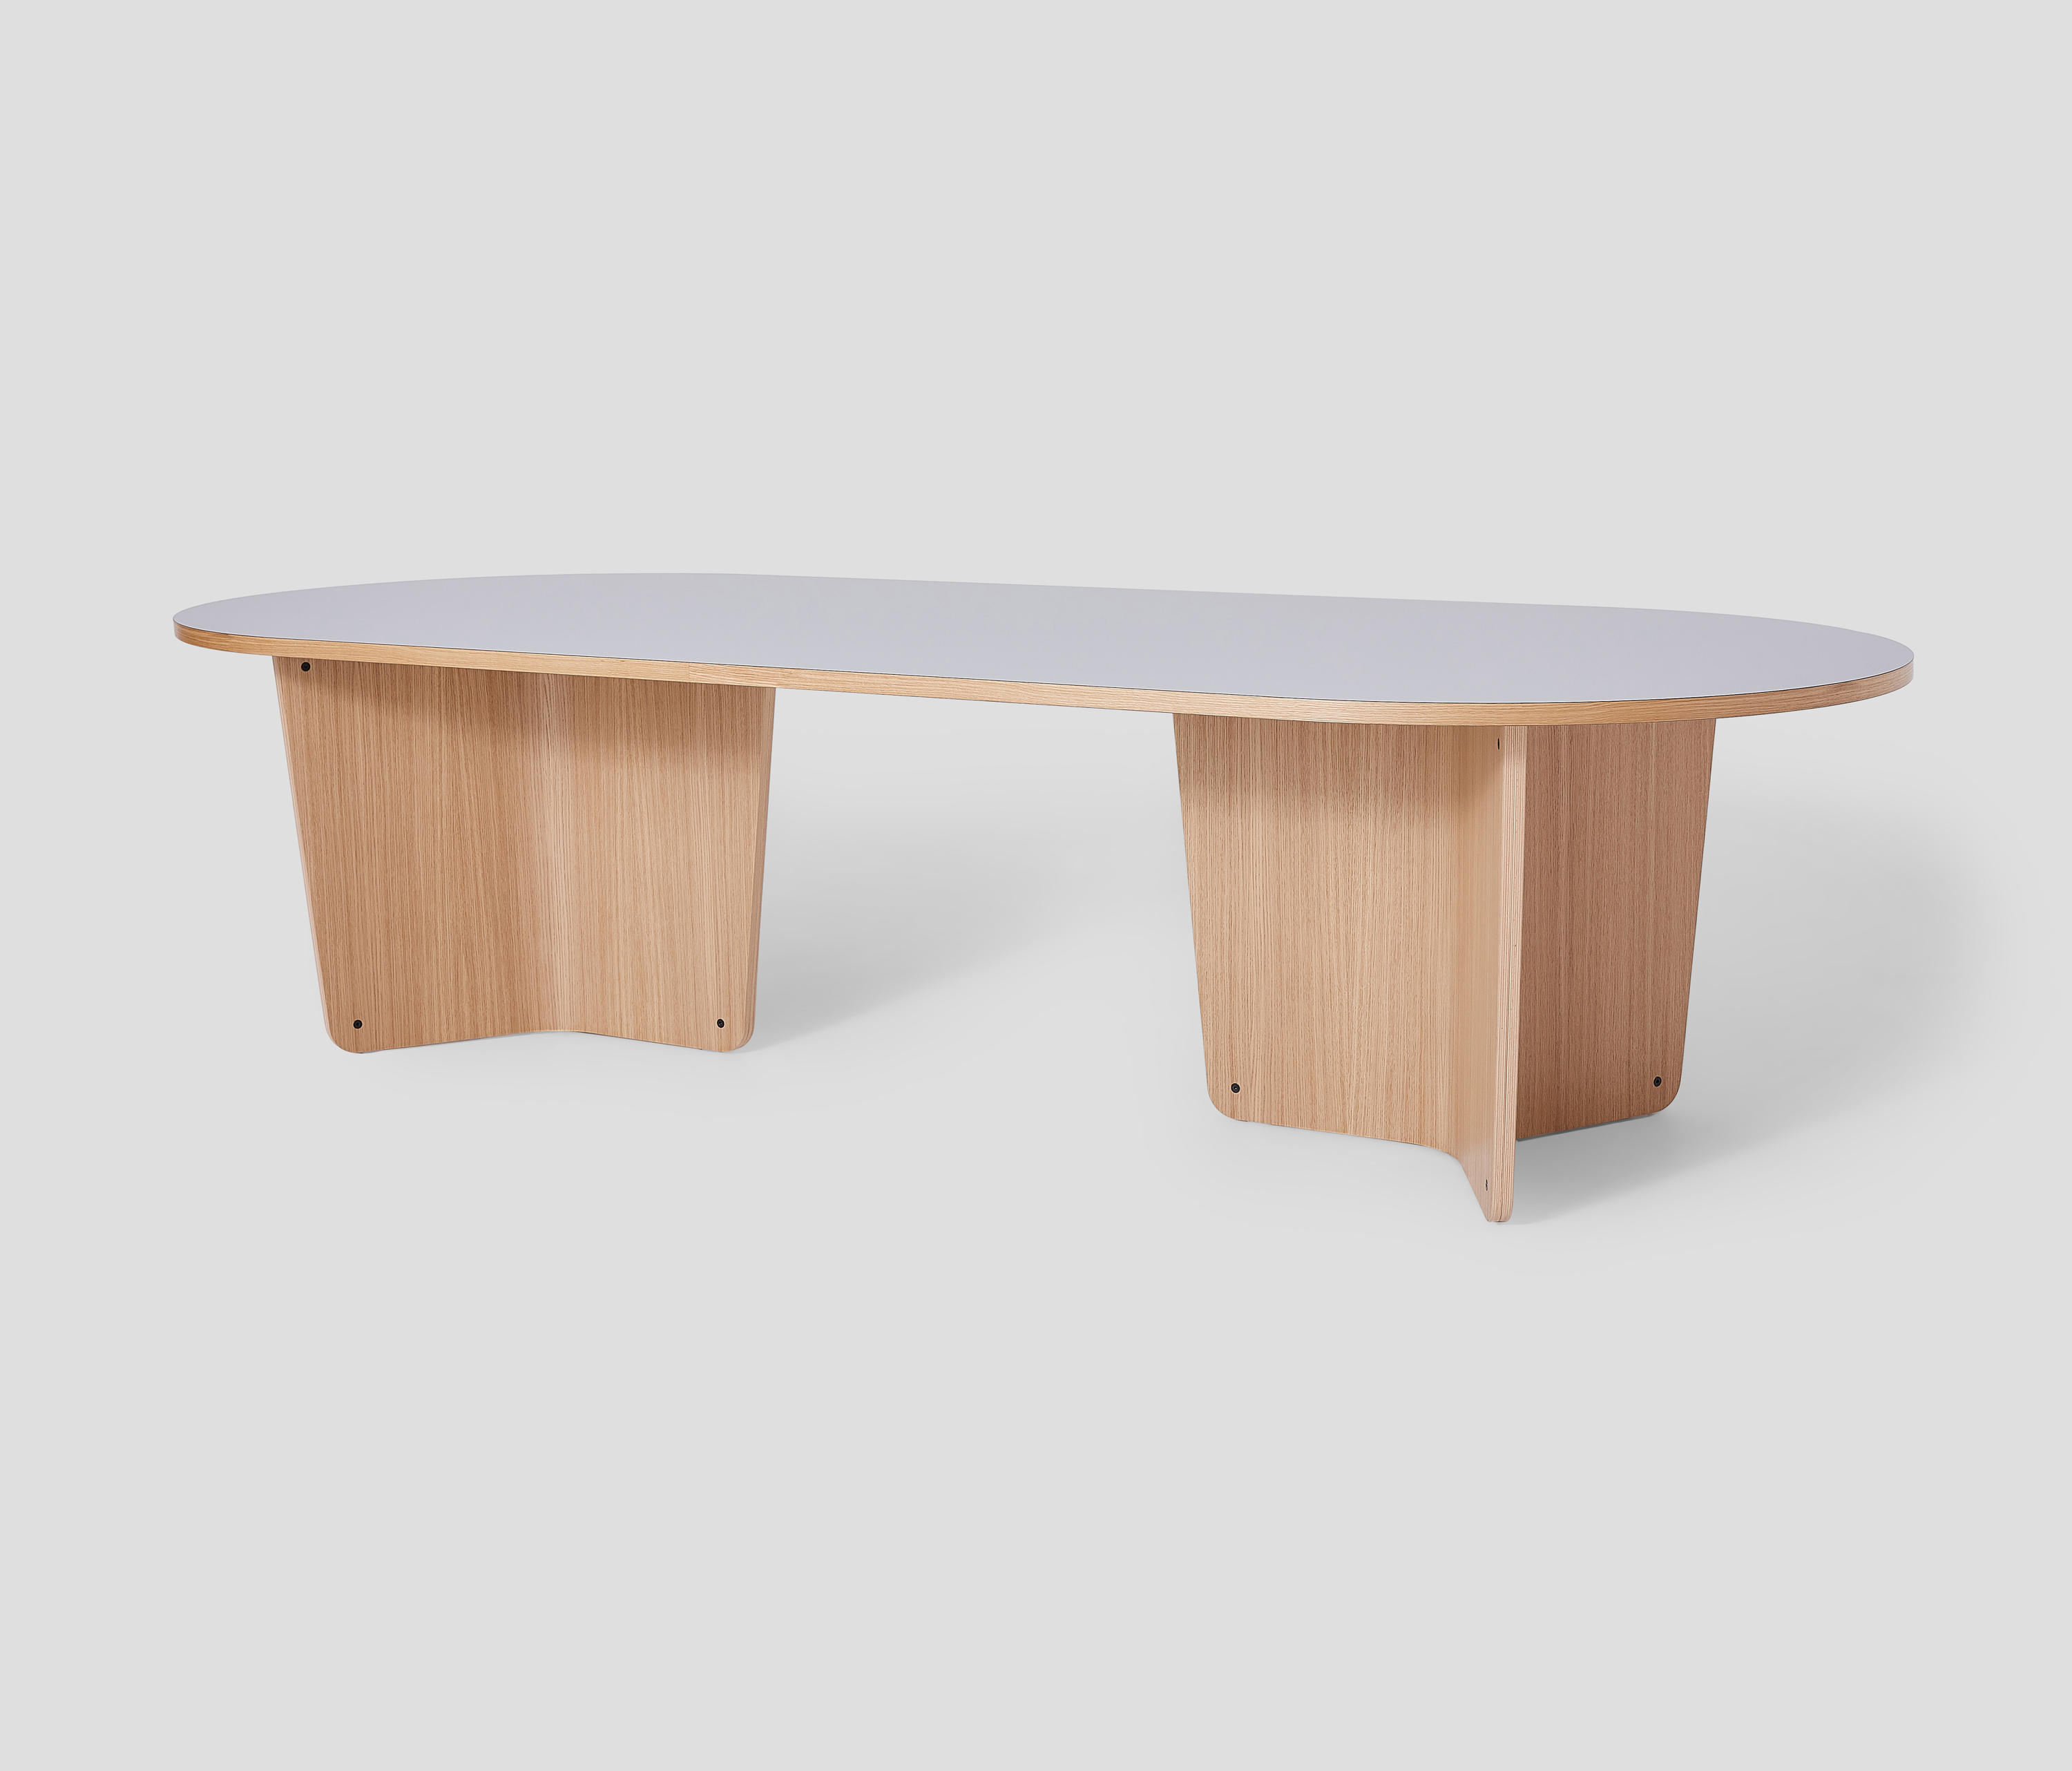 Vg P Y Table Contract Tables From Vg P Architonic